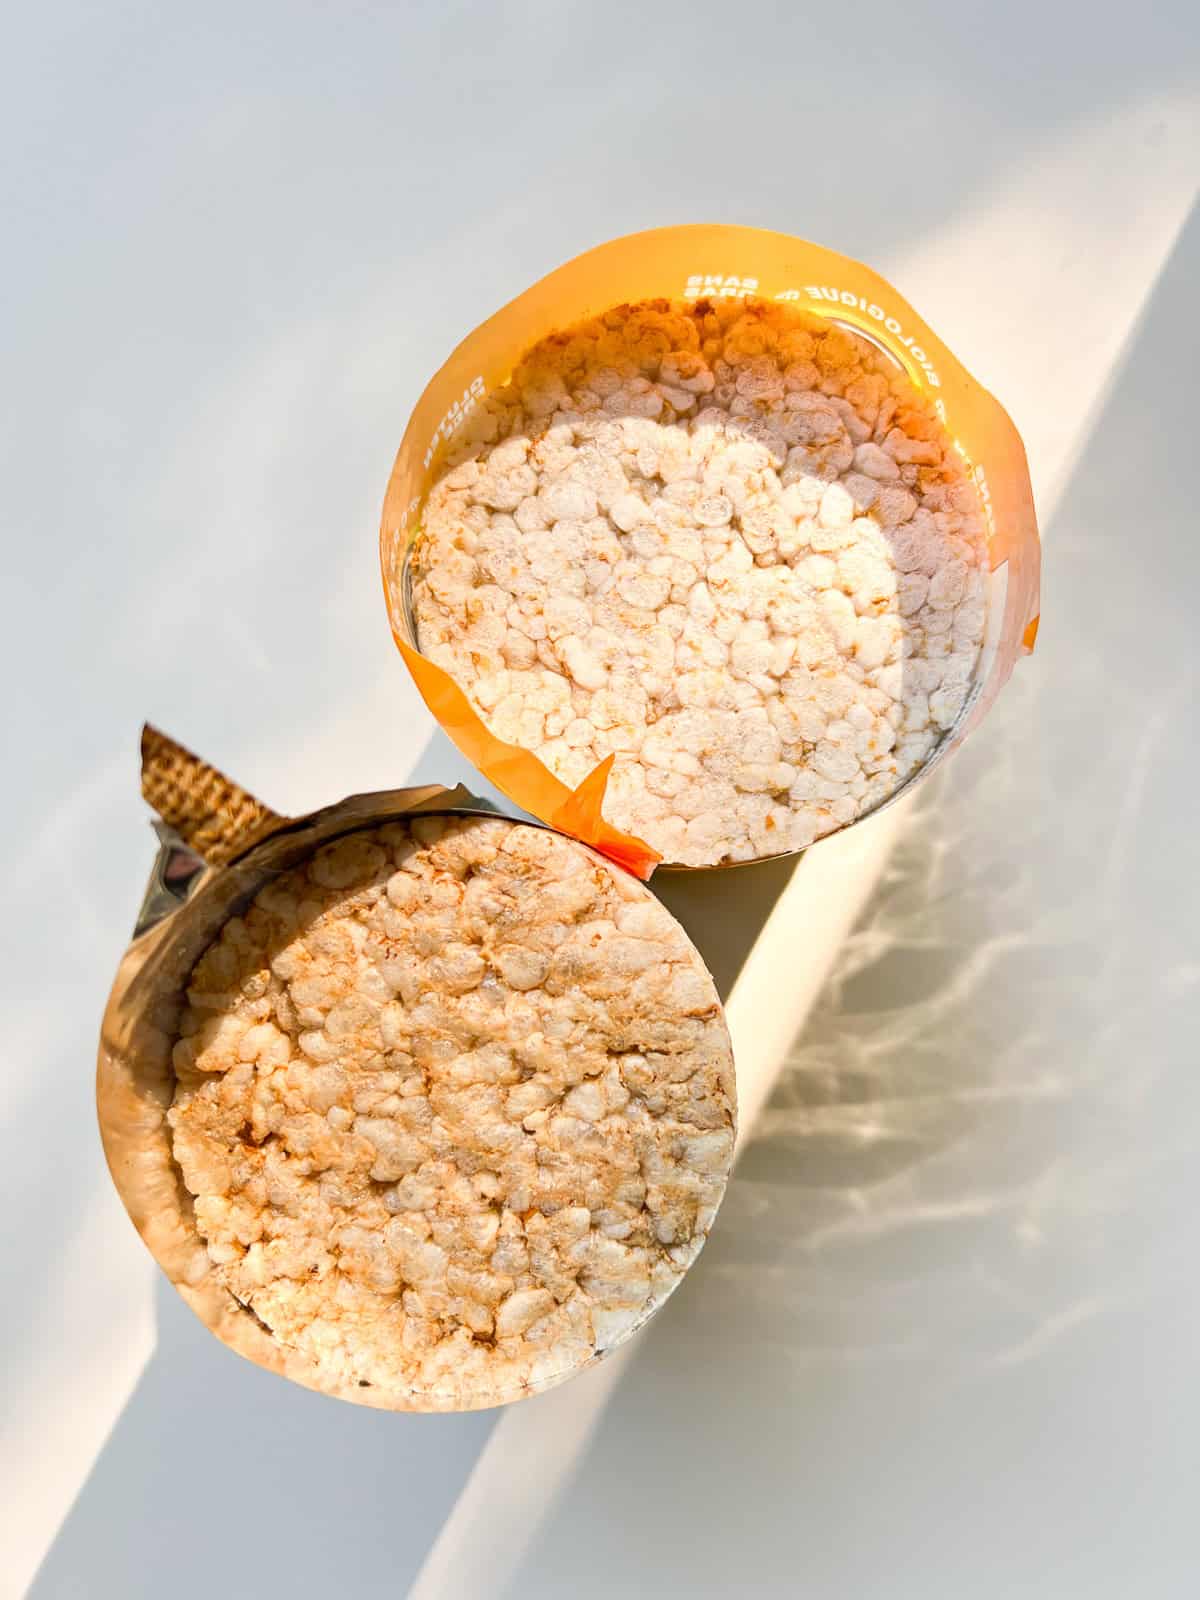 An image of two packages of rice cakes.